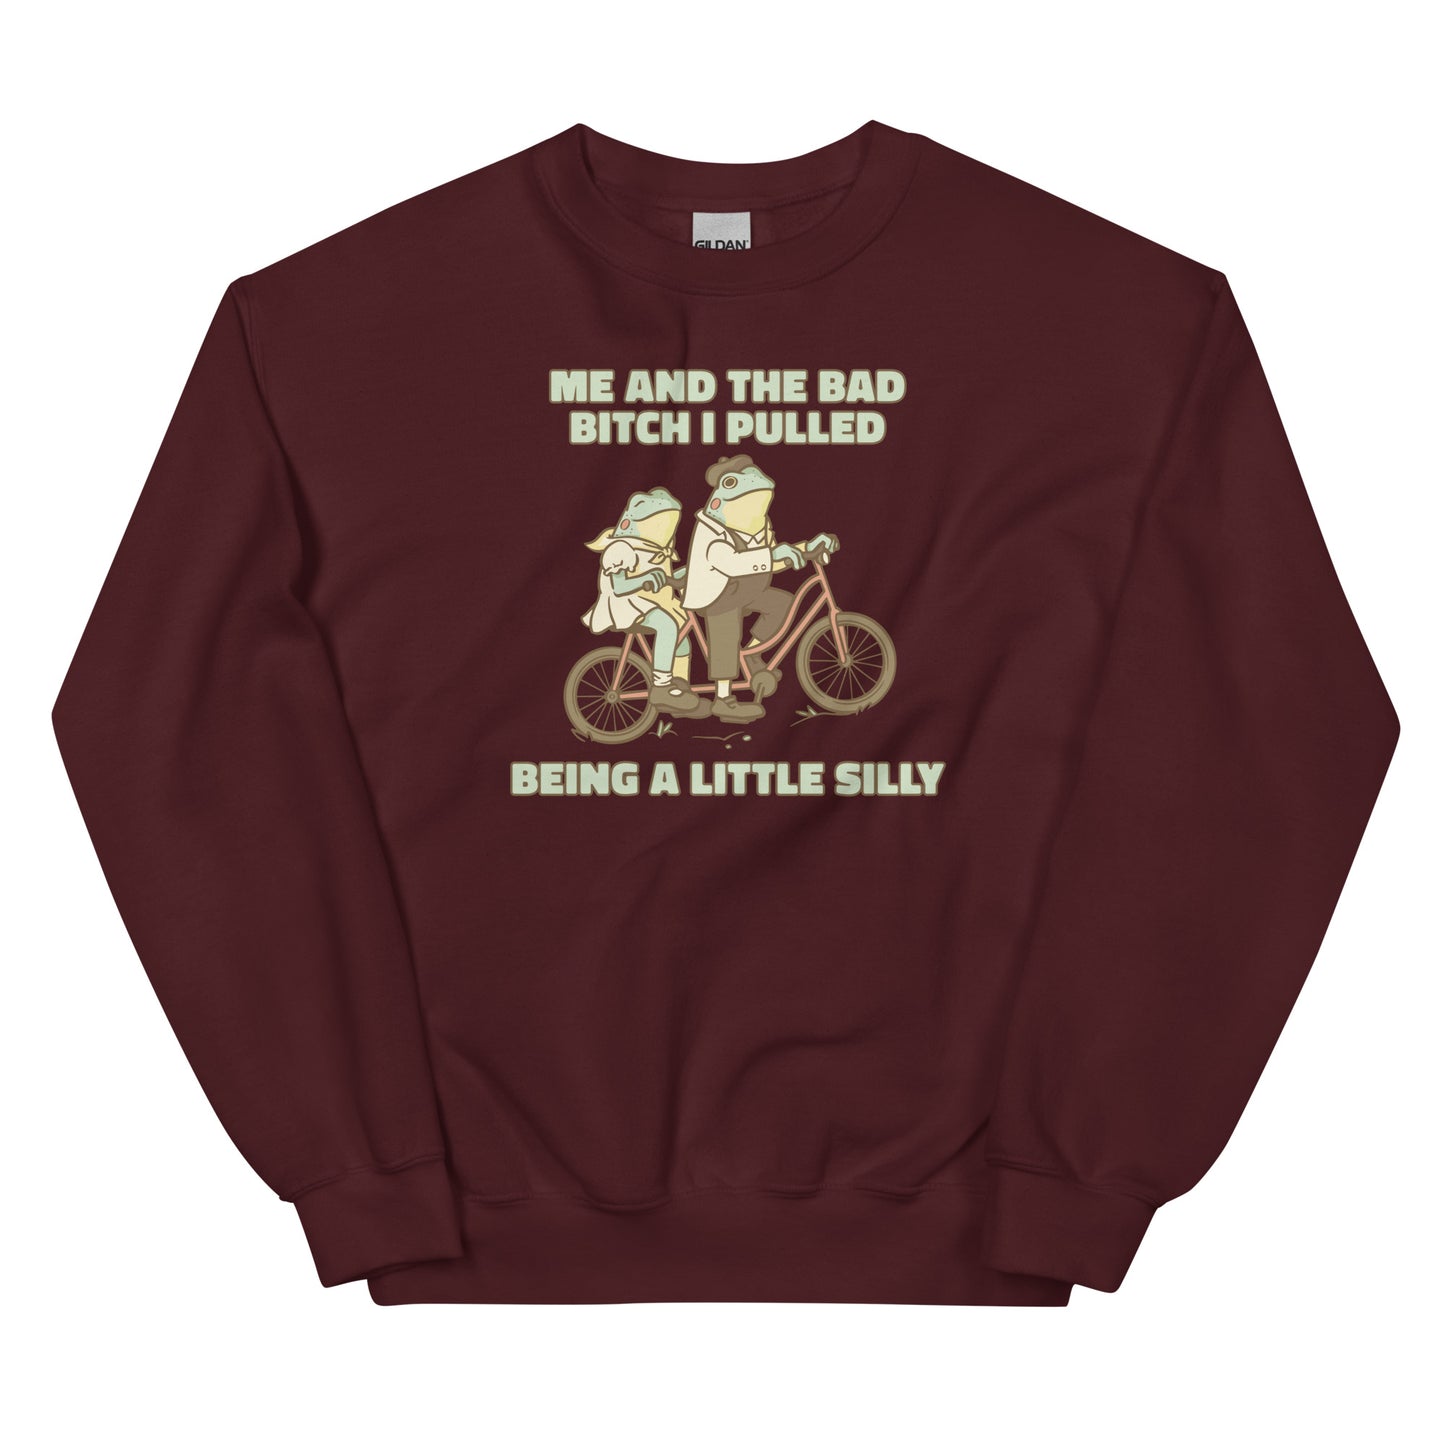 Me and the Bad Bitch I Pulled Unisex Sweatshirt